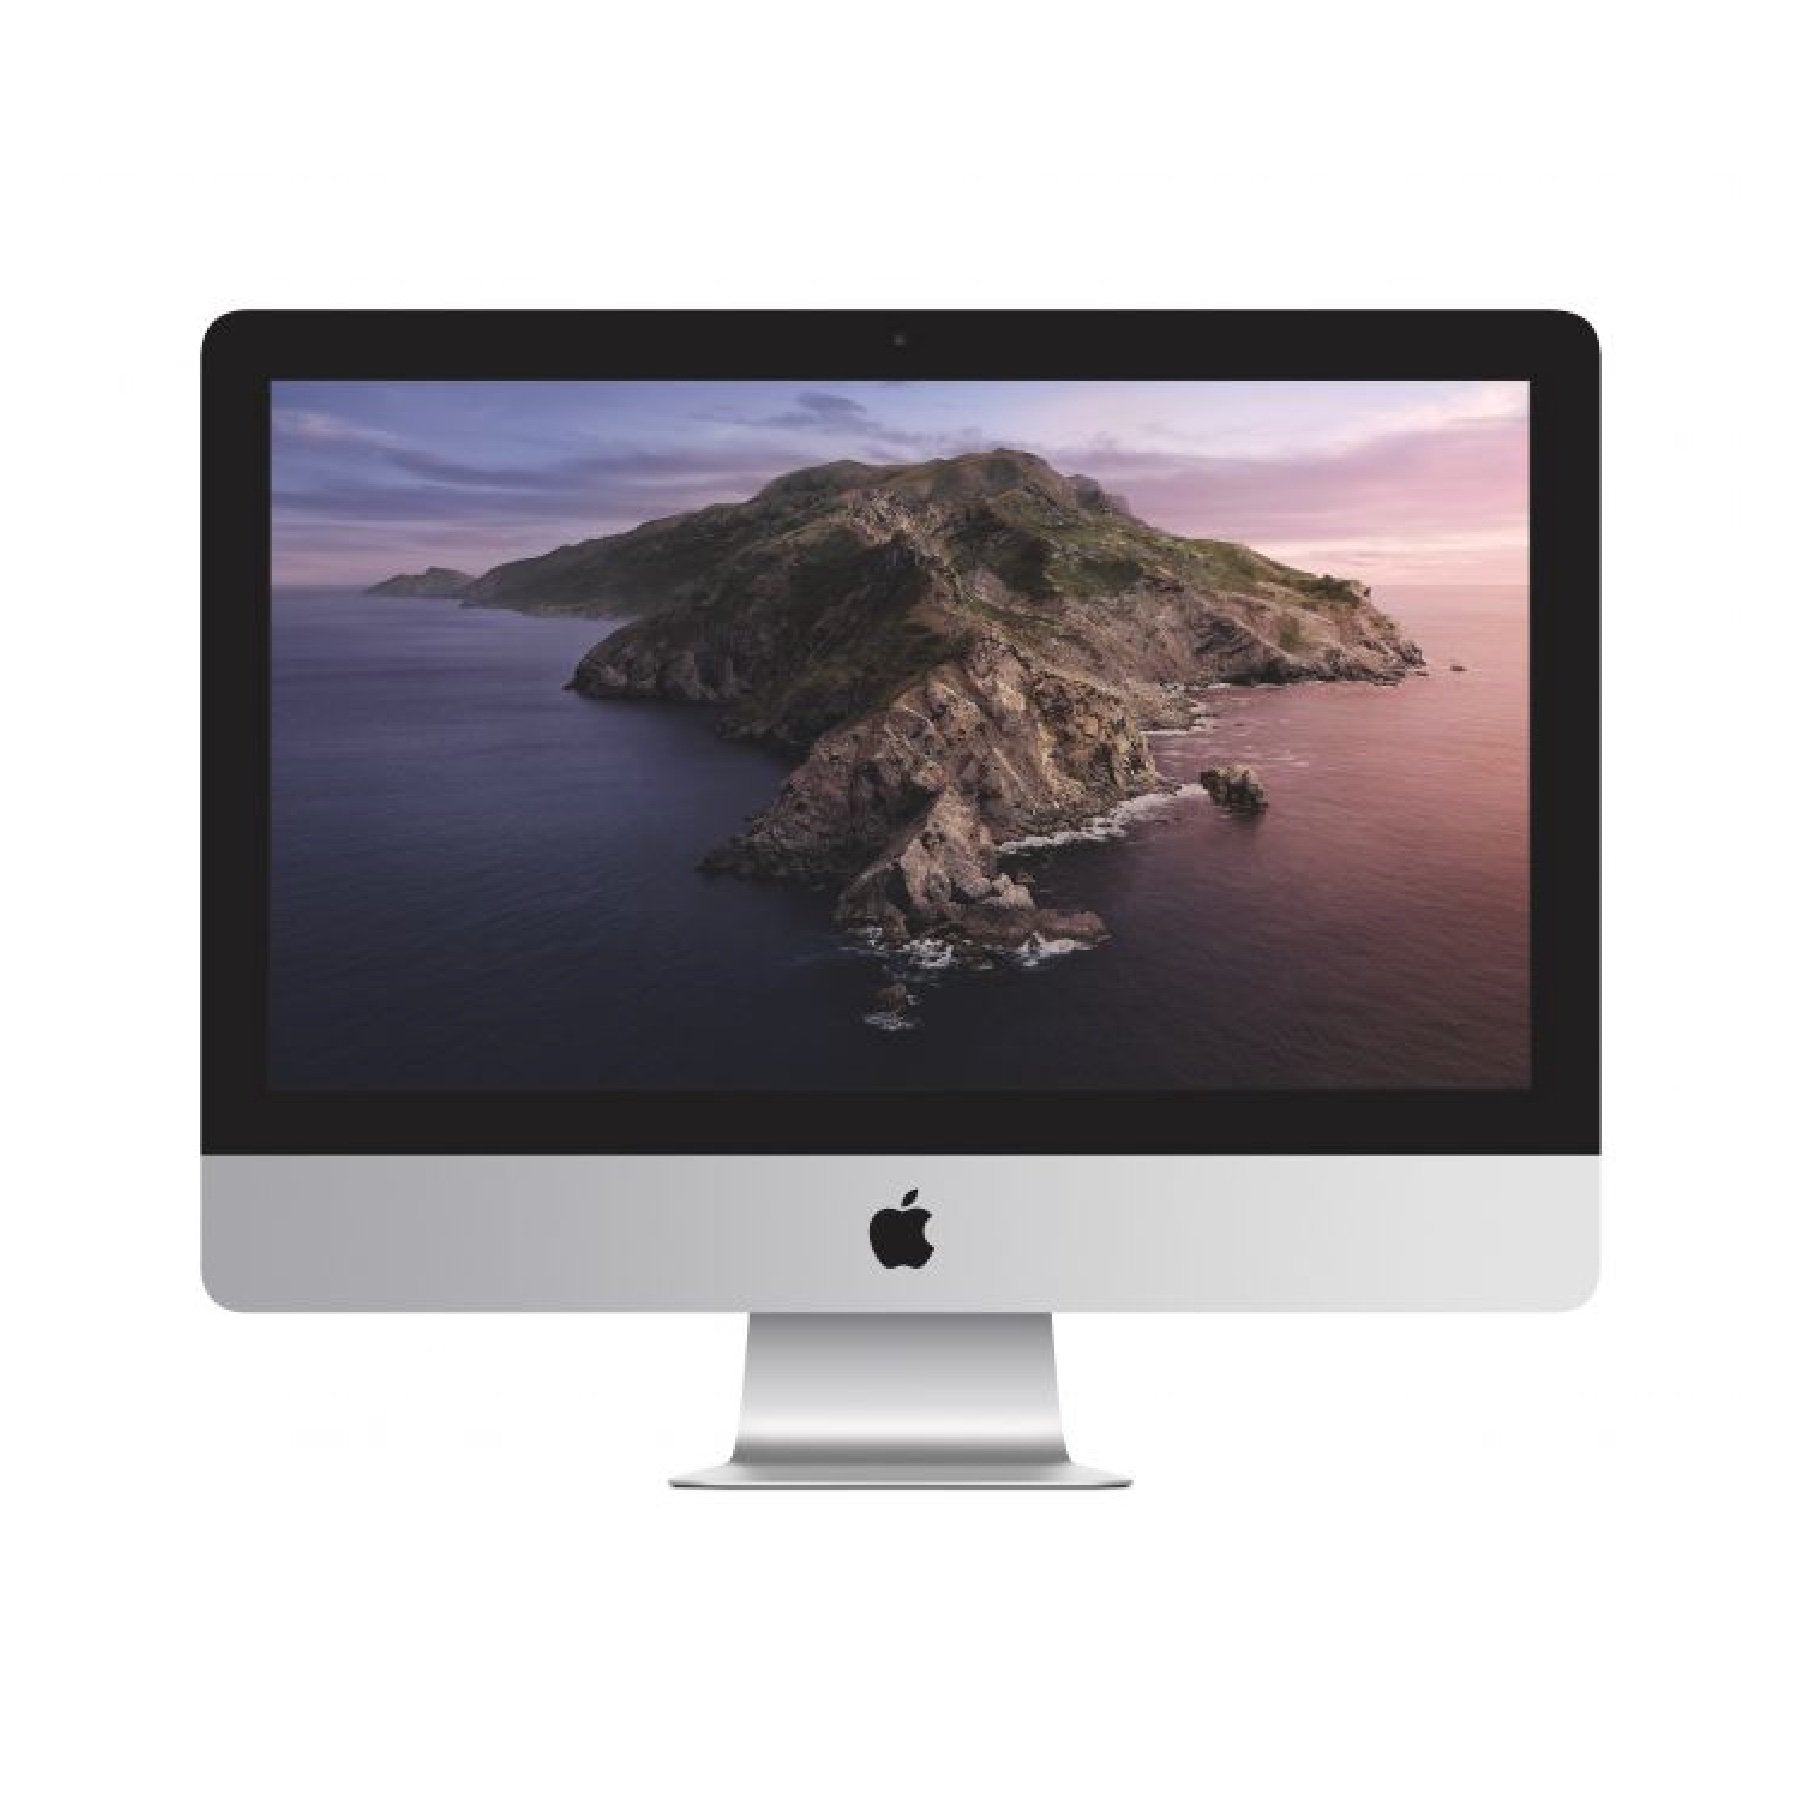 iMac 21.5-inch (3.6GHz Quad Core i3, 2019) 4K Display - Silver (Better) - iStore Pre-owned